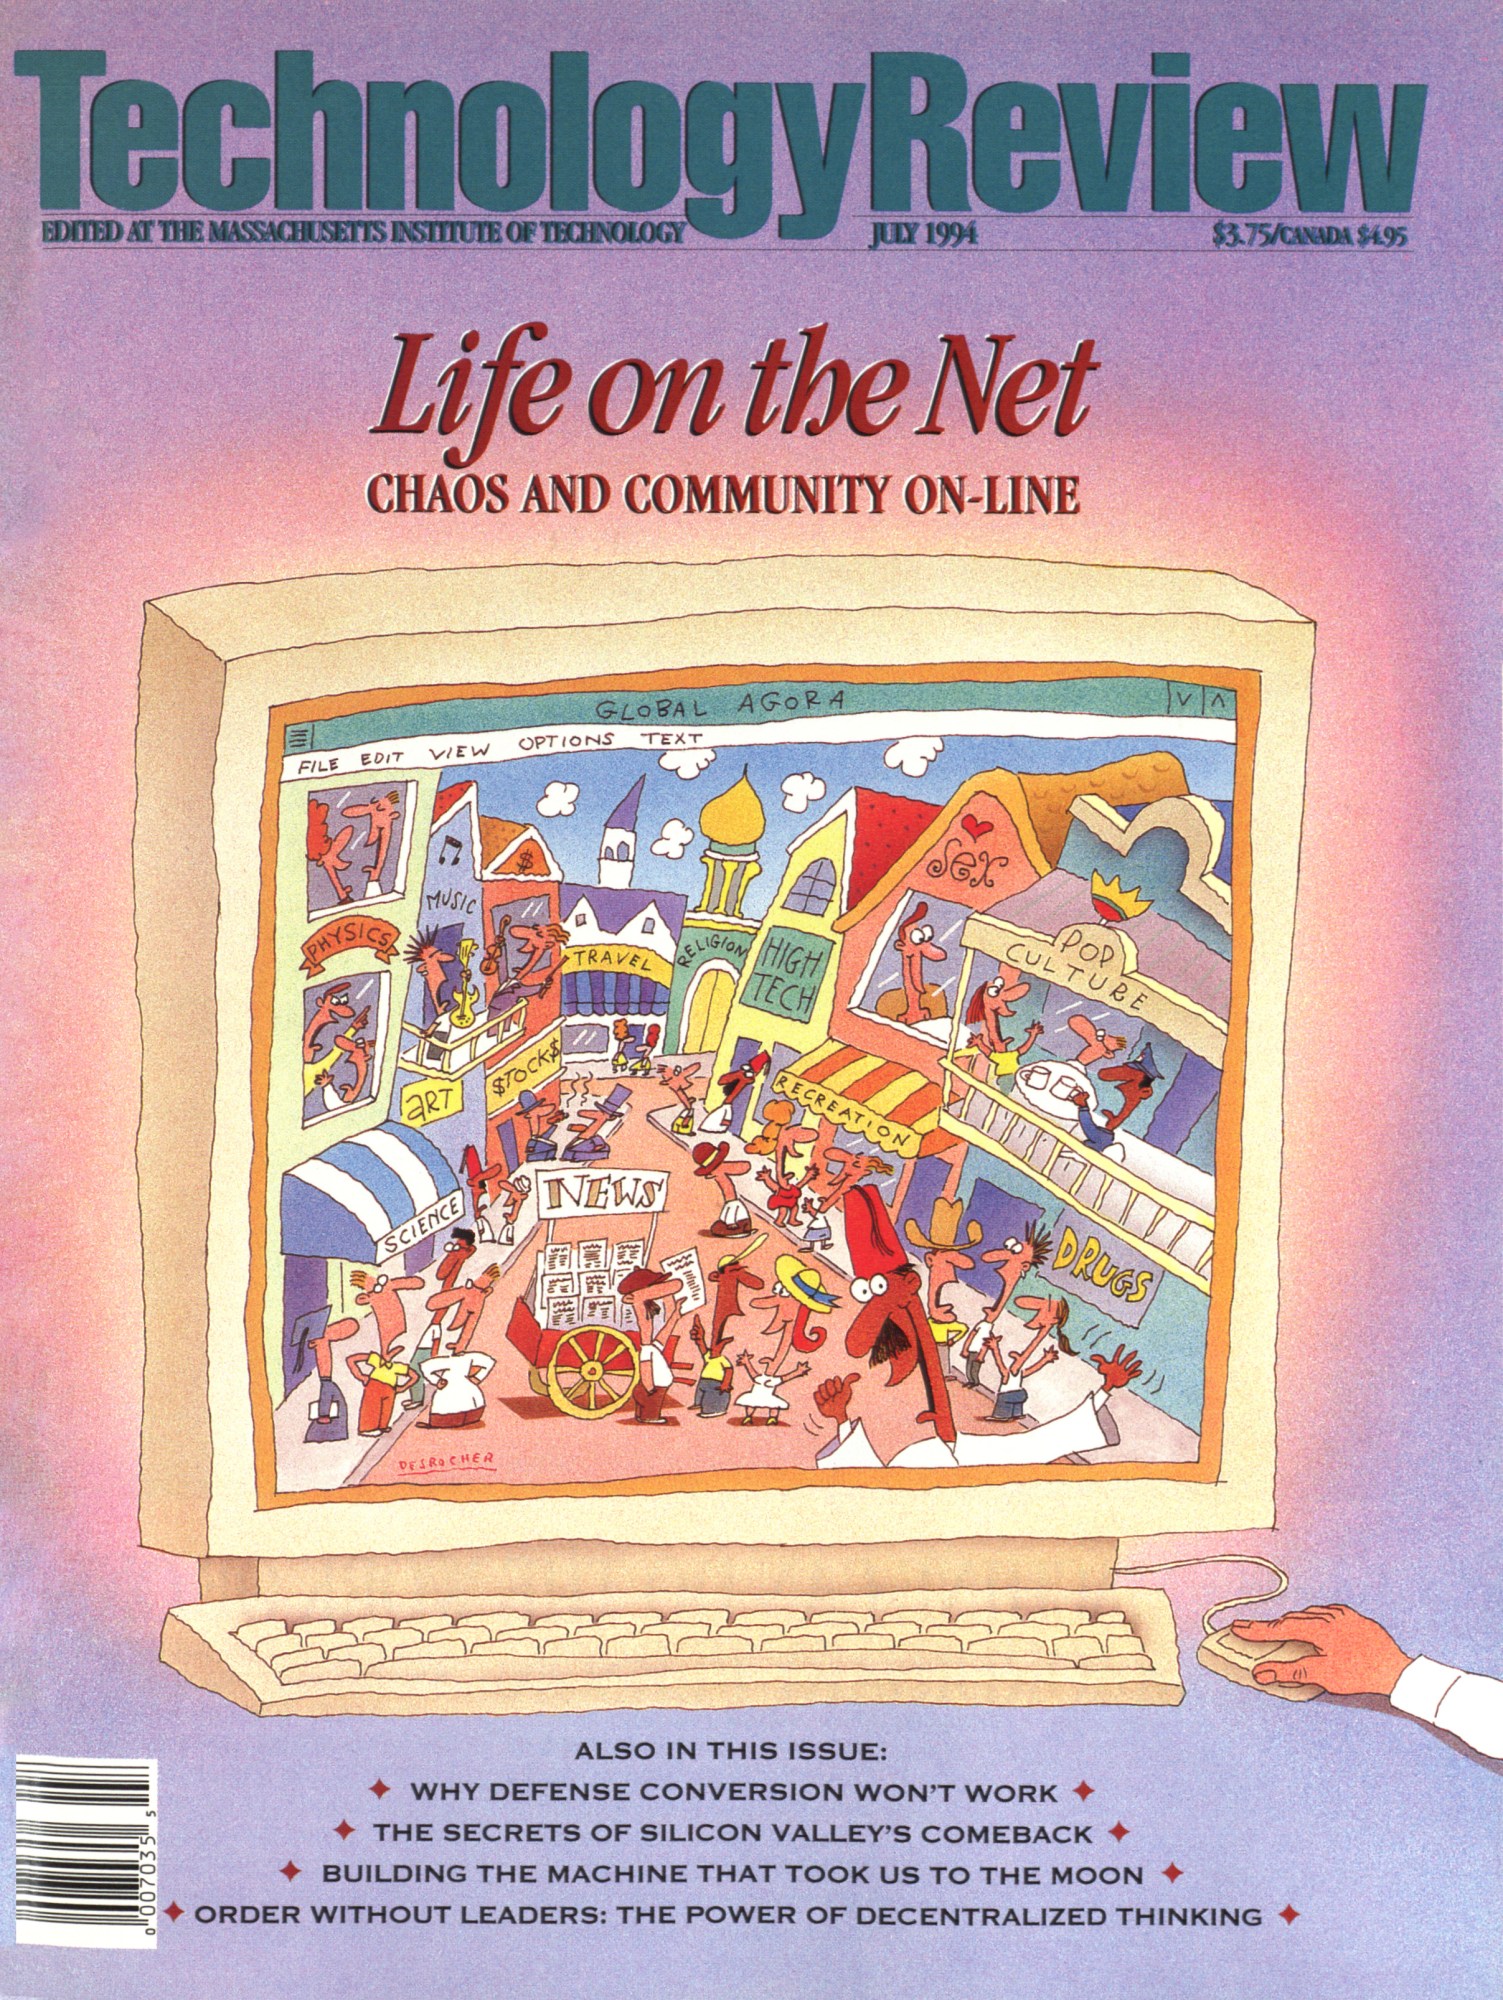 July 1994 cover